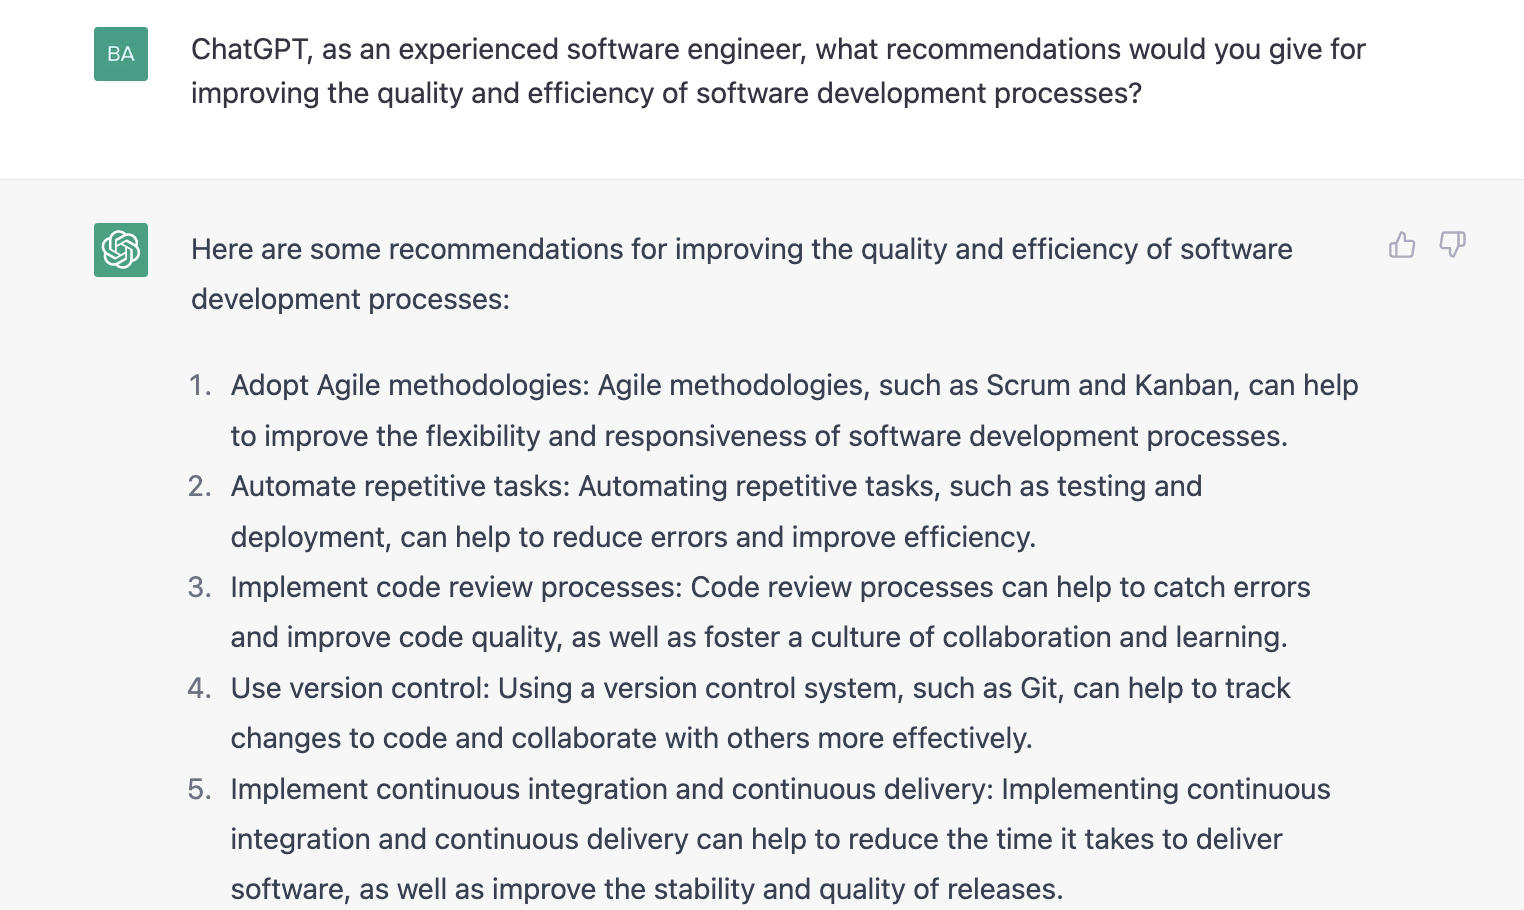 ChatGPT prompt about recommendations for improving the quality and efficiency of software development processes